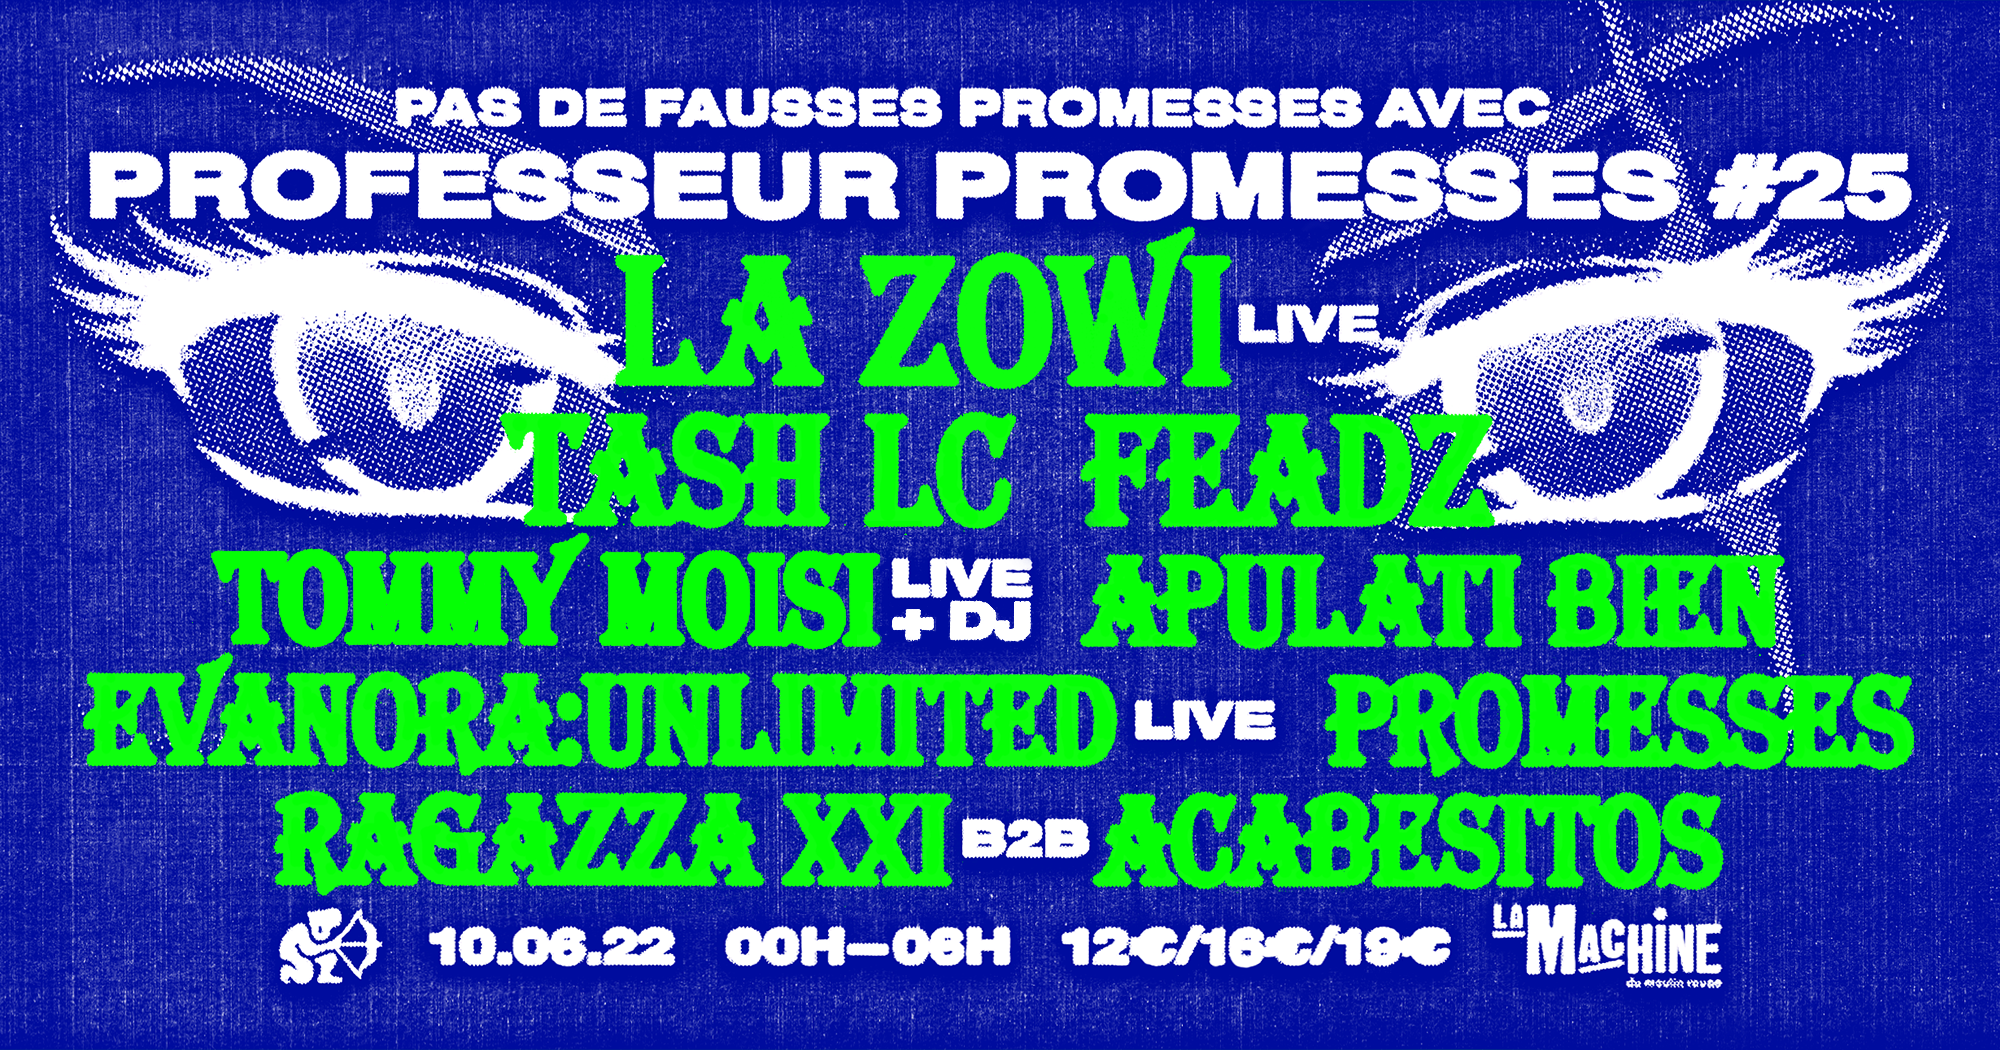 Professeur Promesses #25 with La Zowi, Tash LC, Feadz, Evanora:Unlimited, tommy moisi - フライヤー表